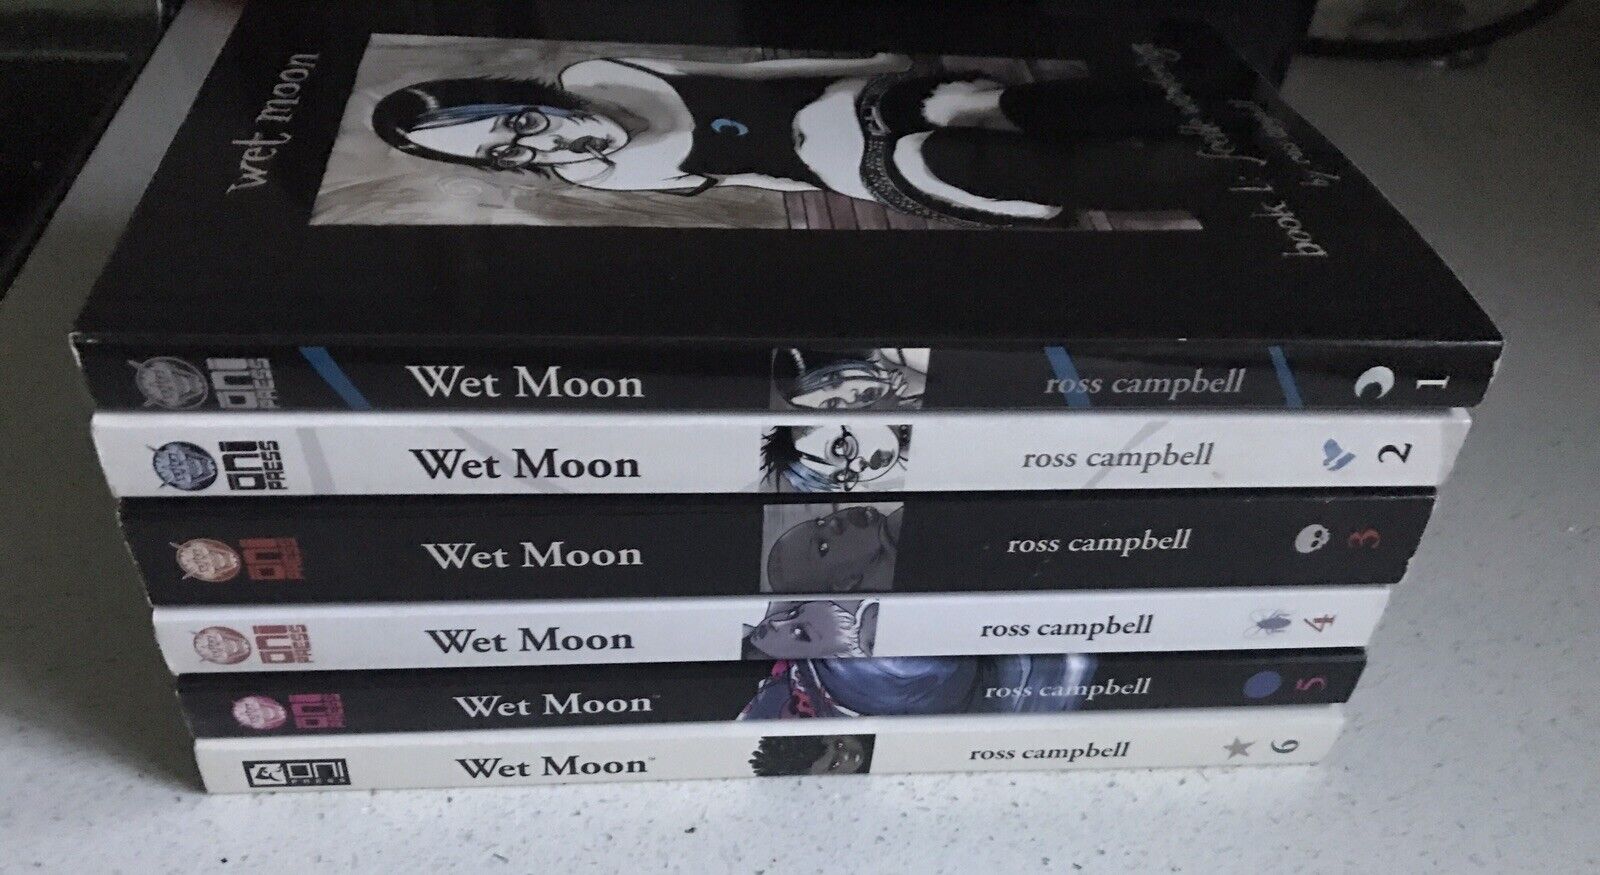 WET MOON VOL 1-6 BY ROSS CAMPBELL